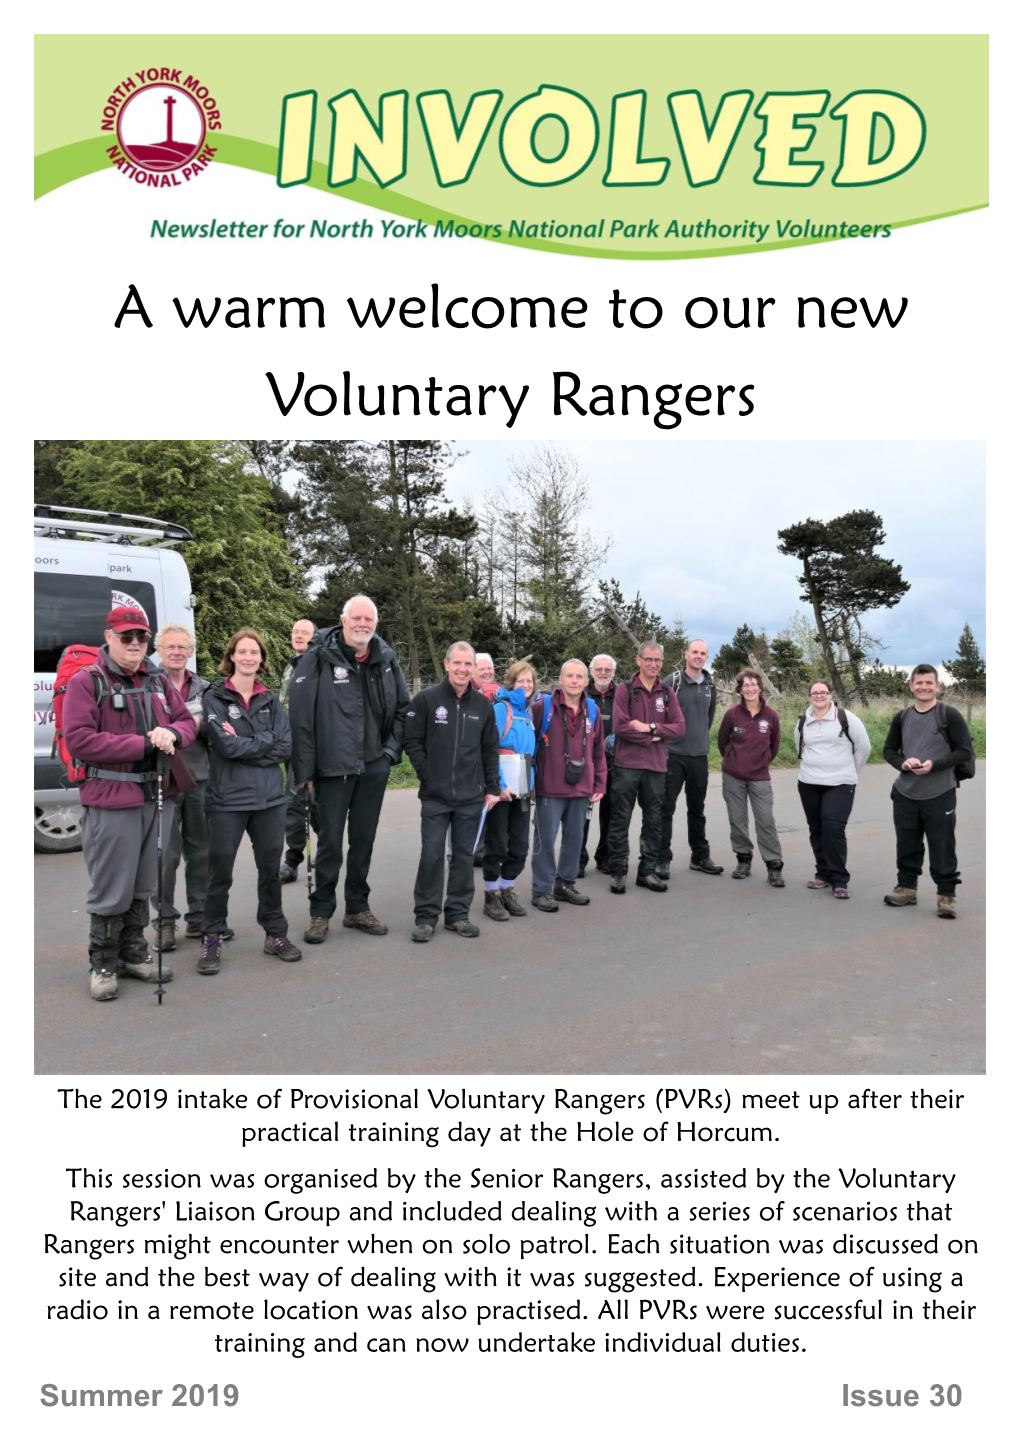 A Warm Welcome to Our New Voluntary Rangers